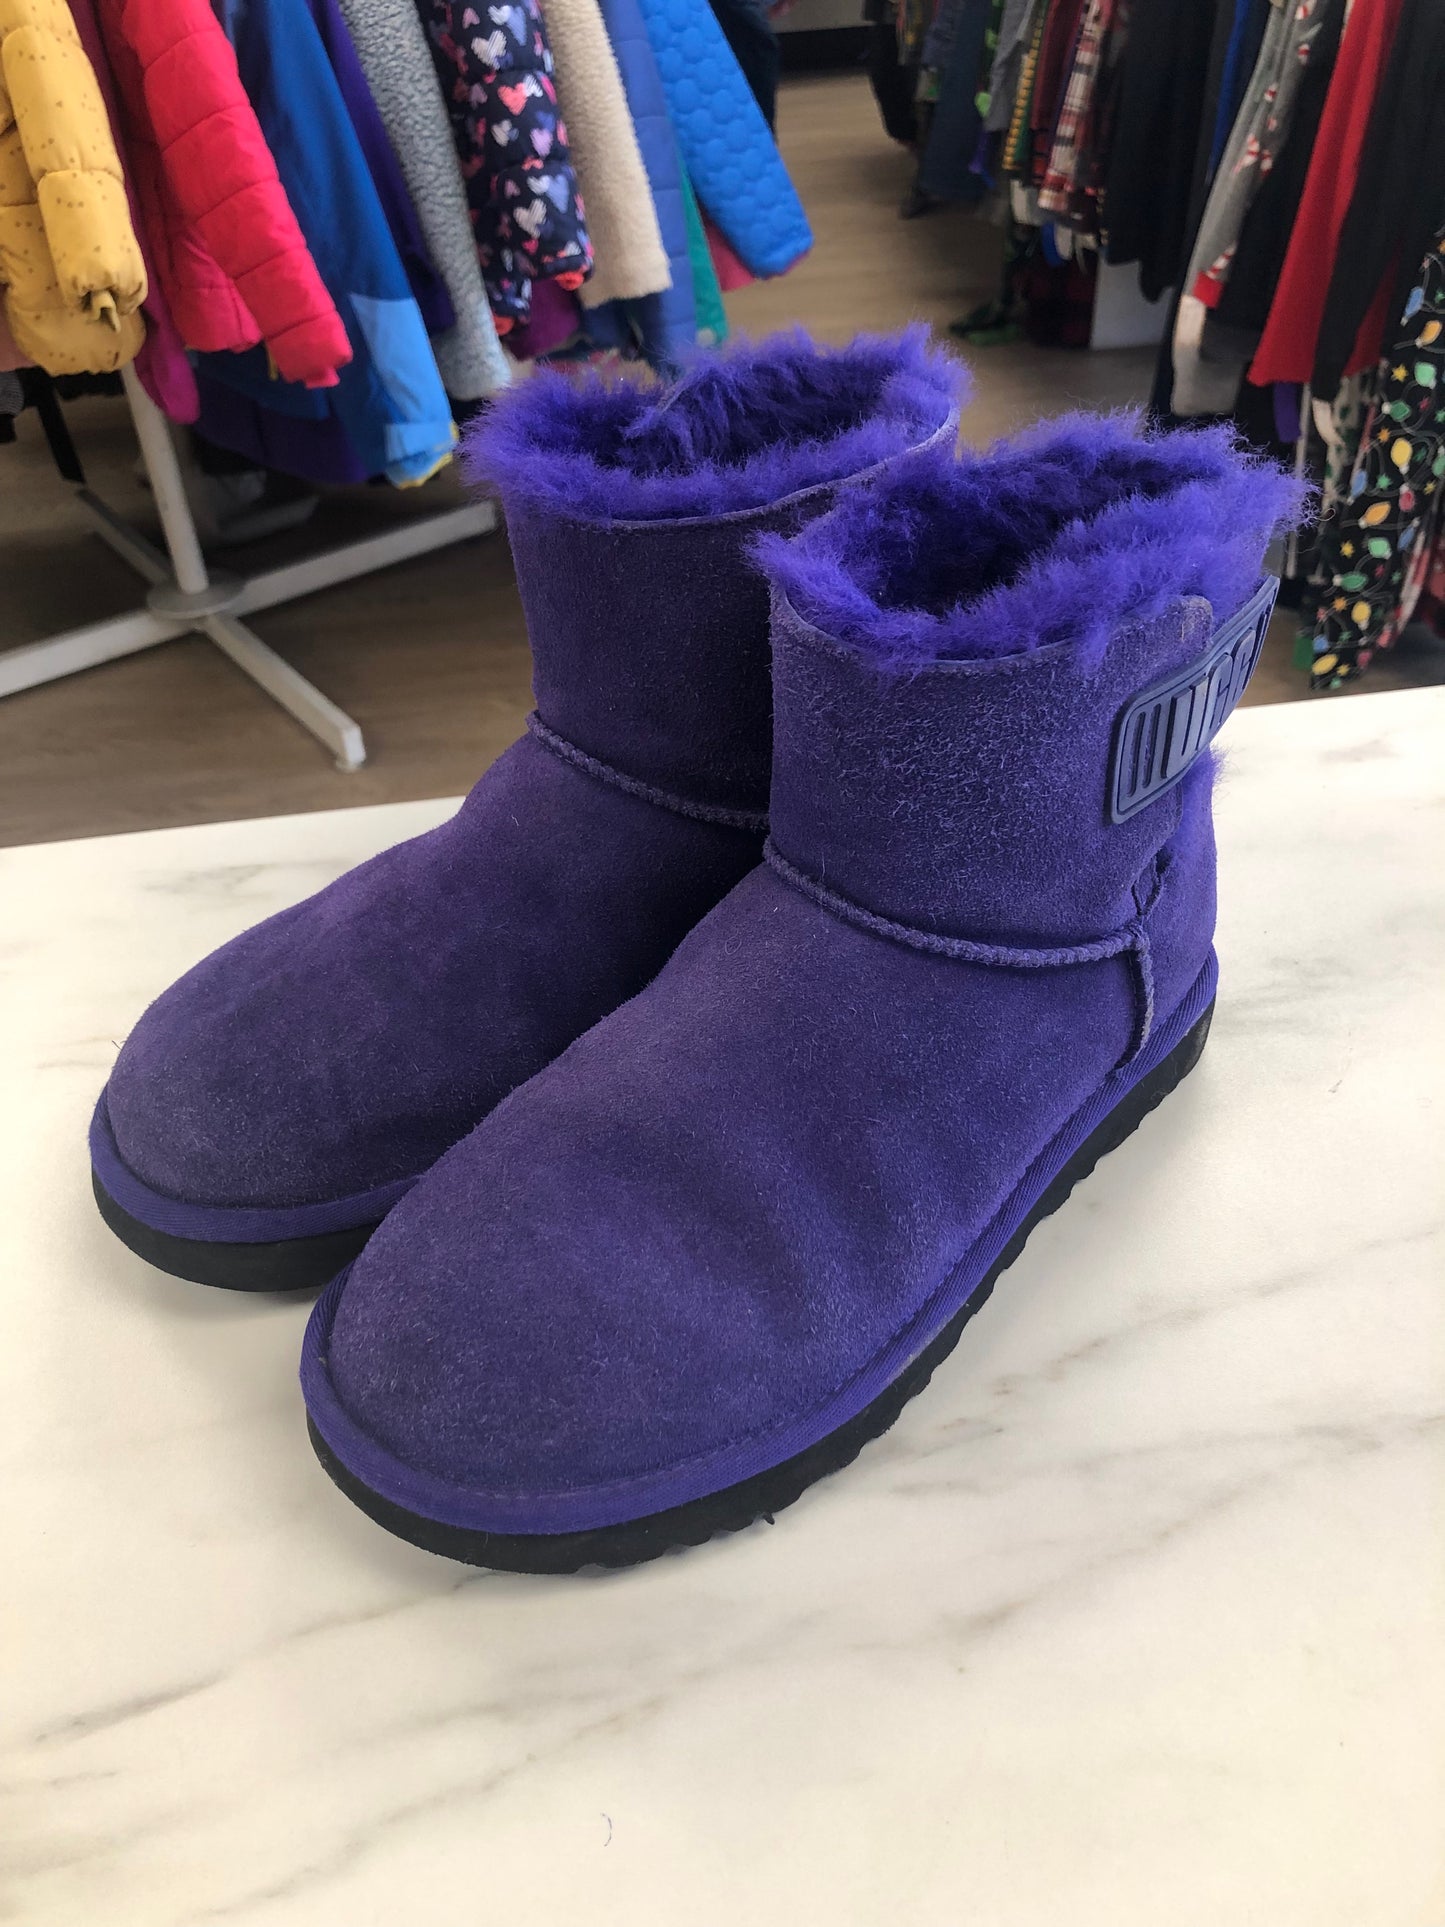 UGG Adult Size 7 Purple Shoes/Boots